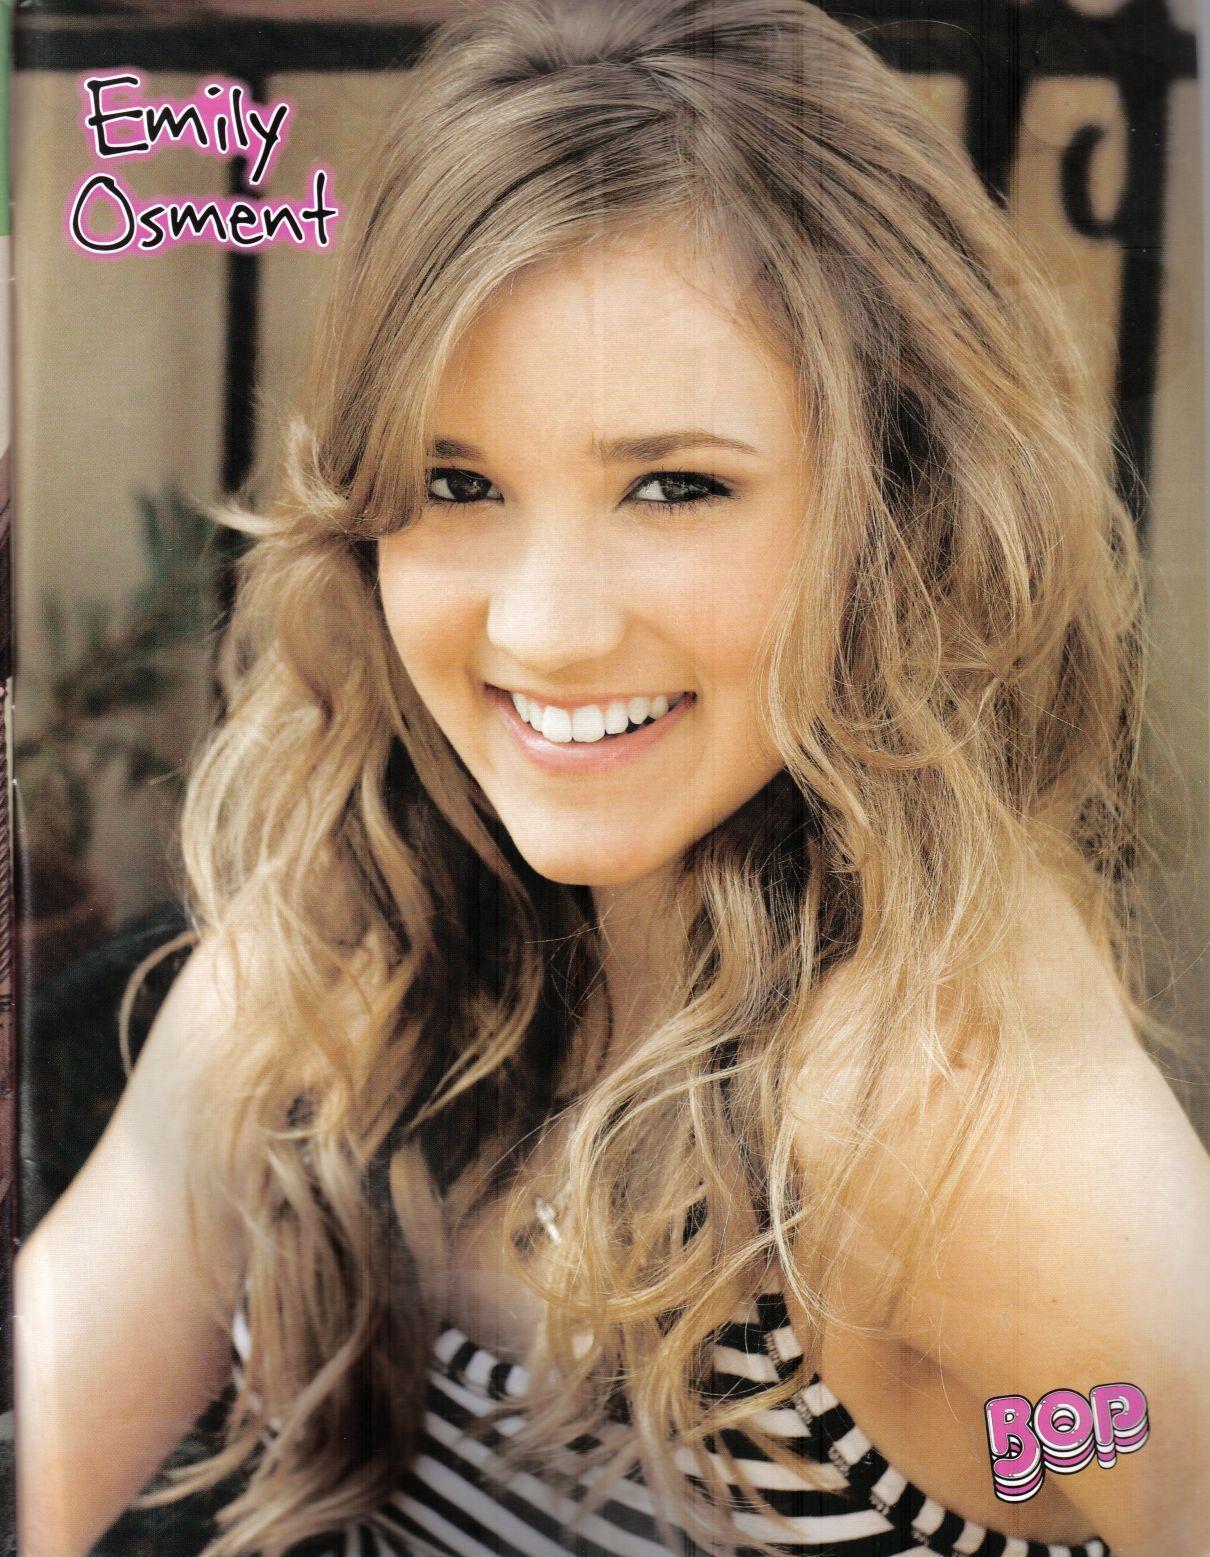 Emily Osment Image & Wallpaper on Jeweell